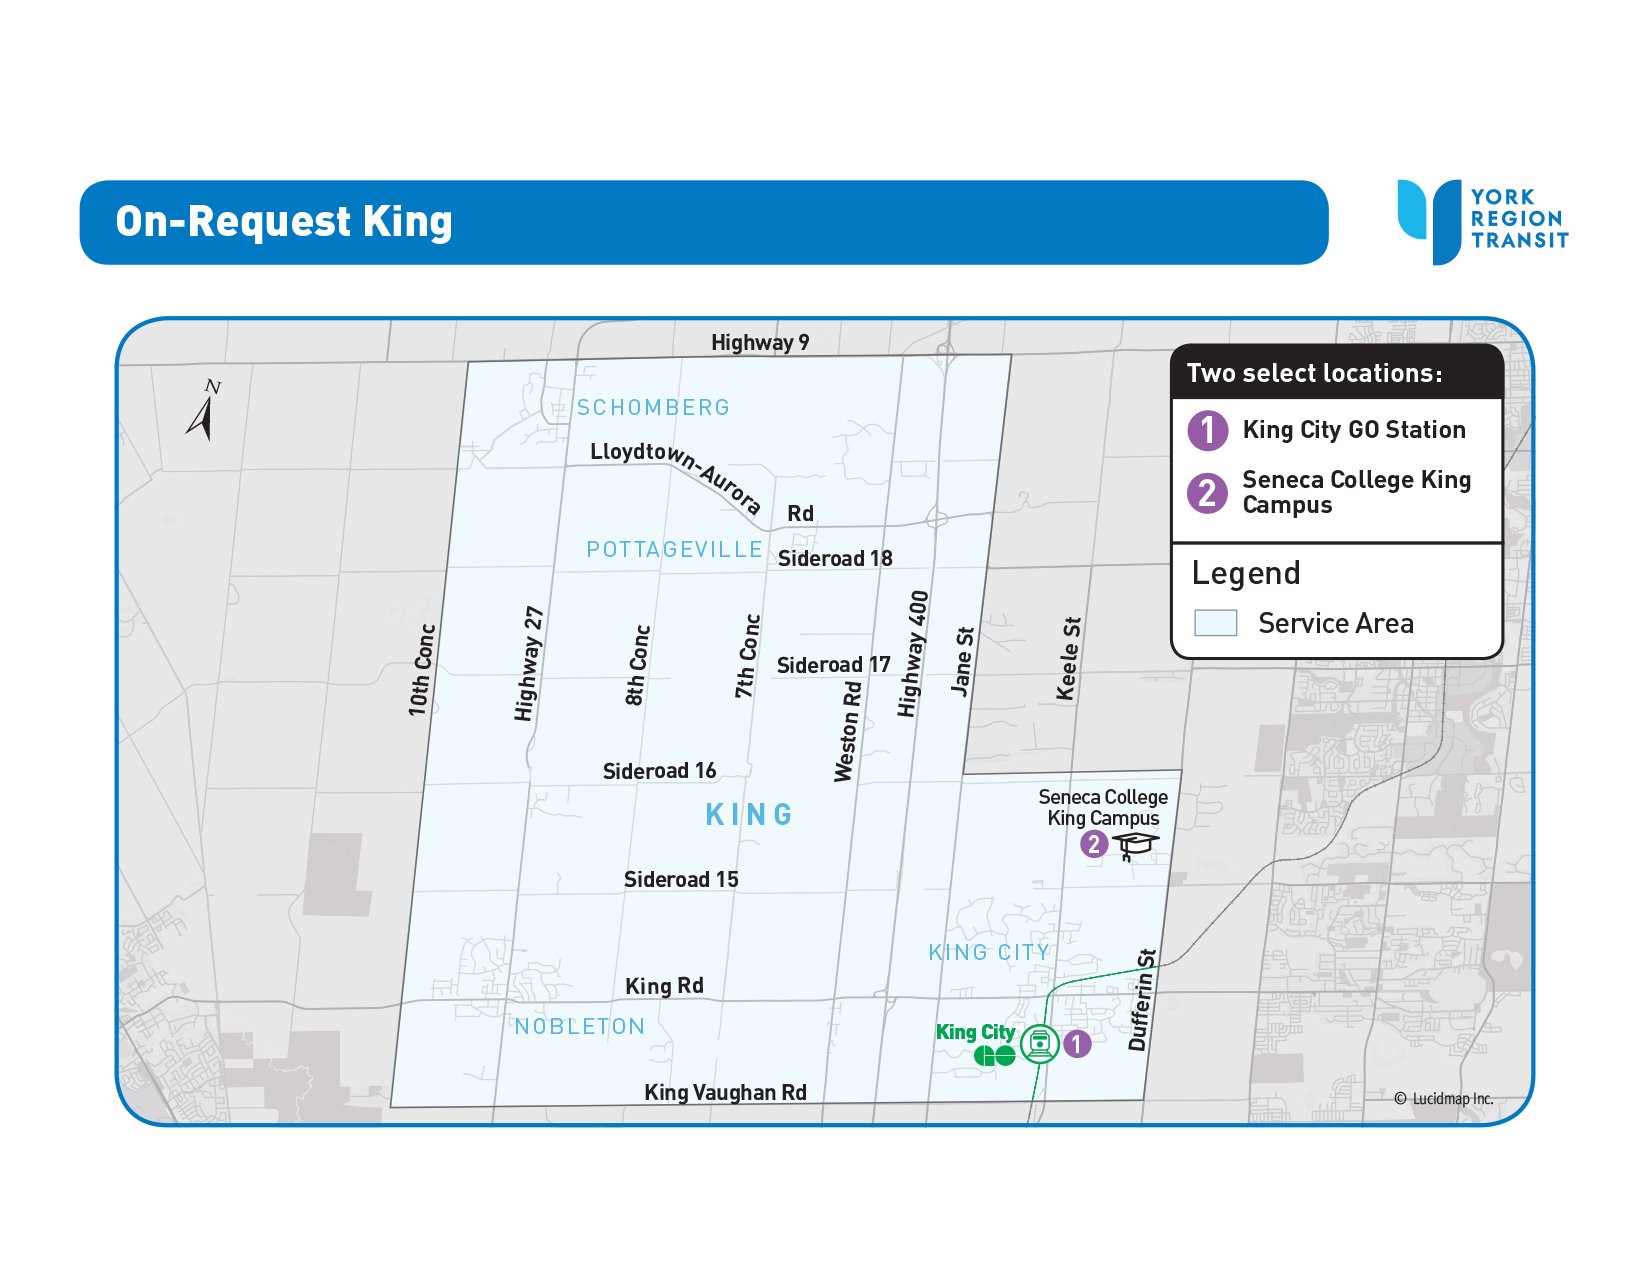 On-Request King Service Area Map